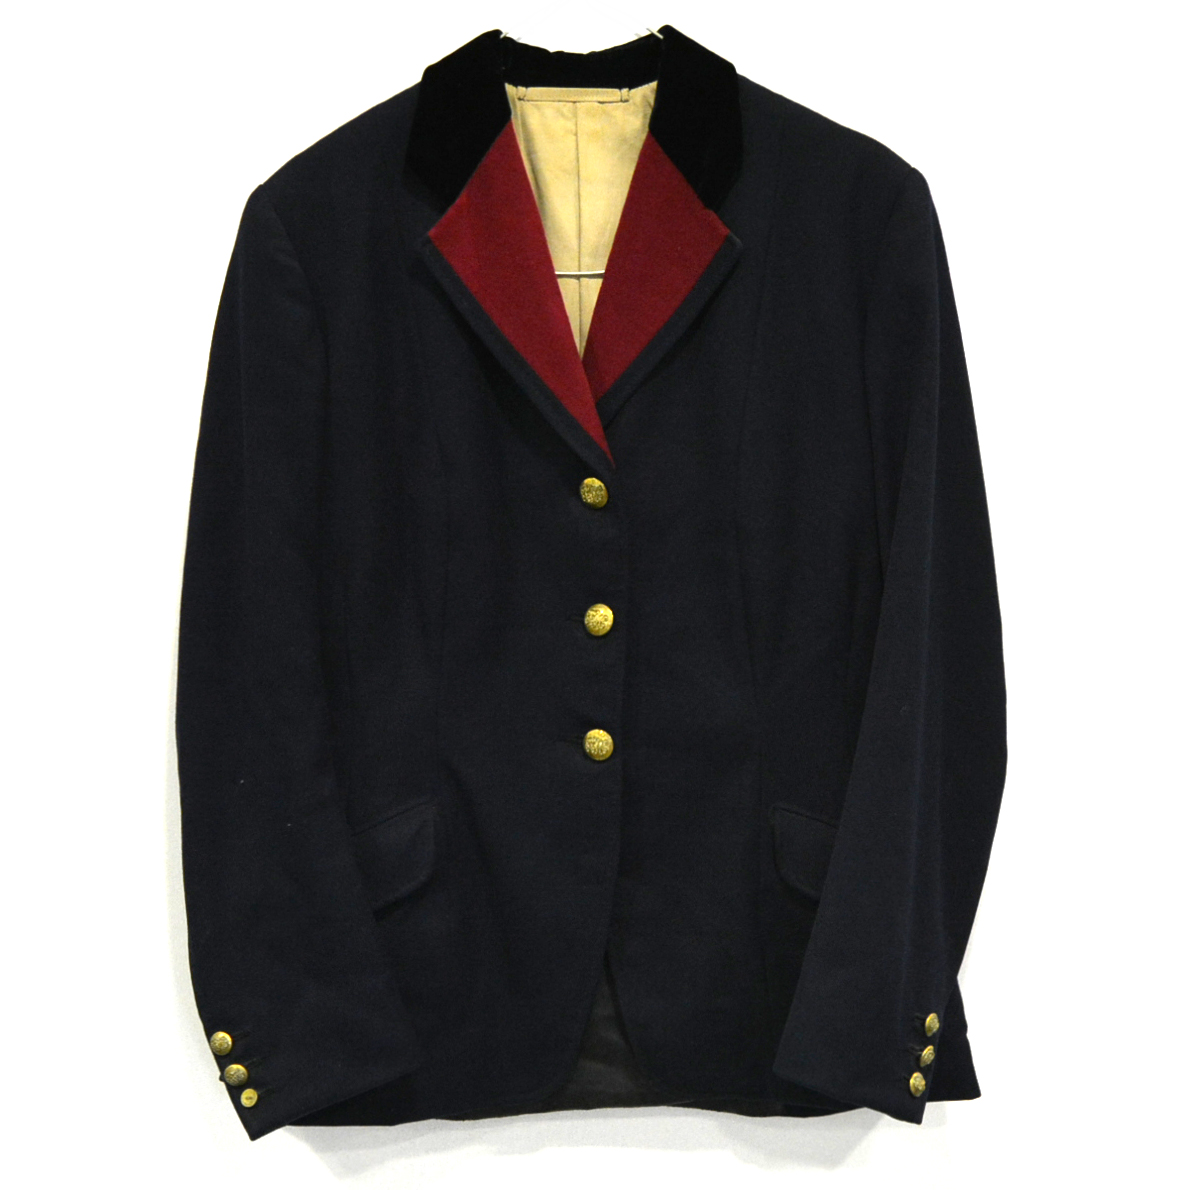 Blue hunting jacket, with buttons.